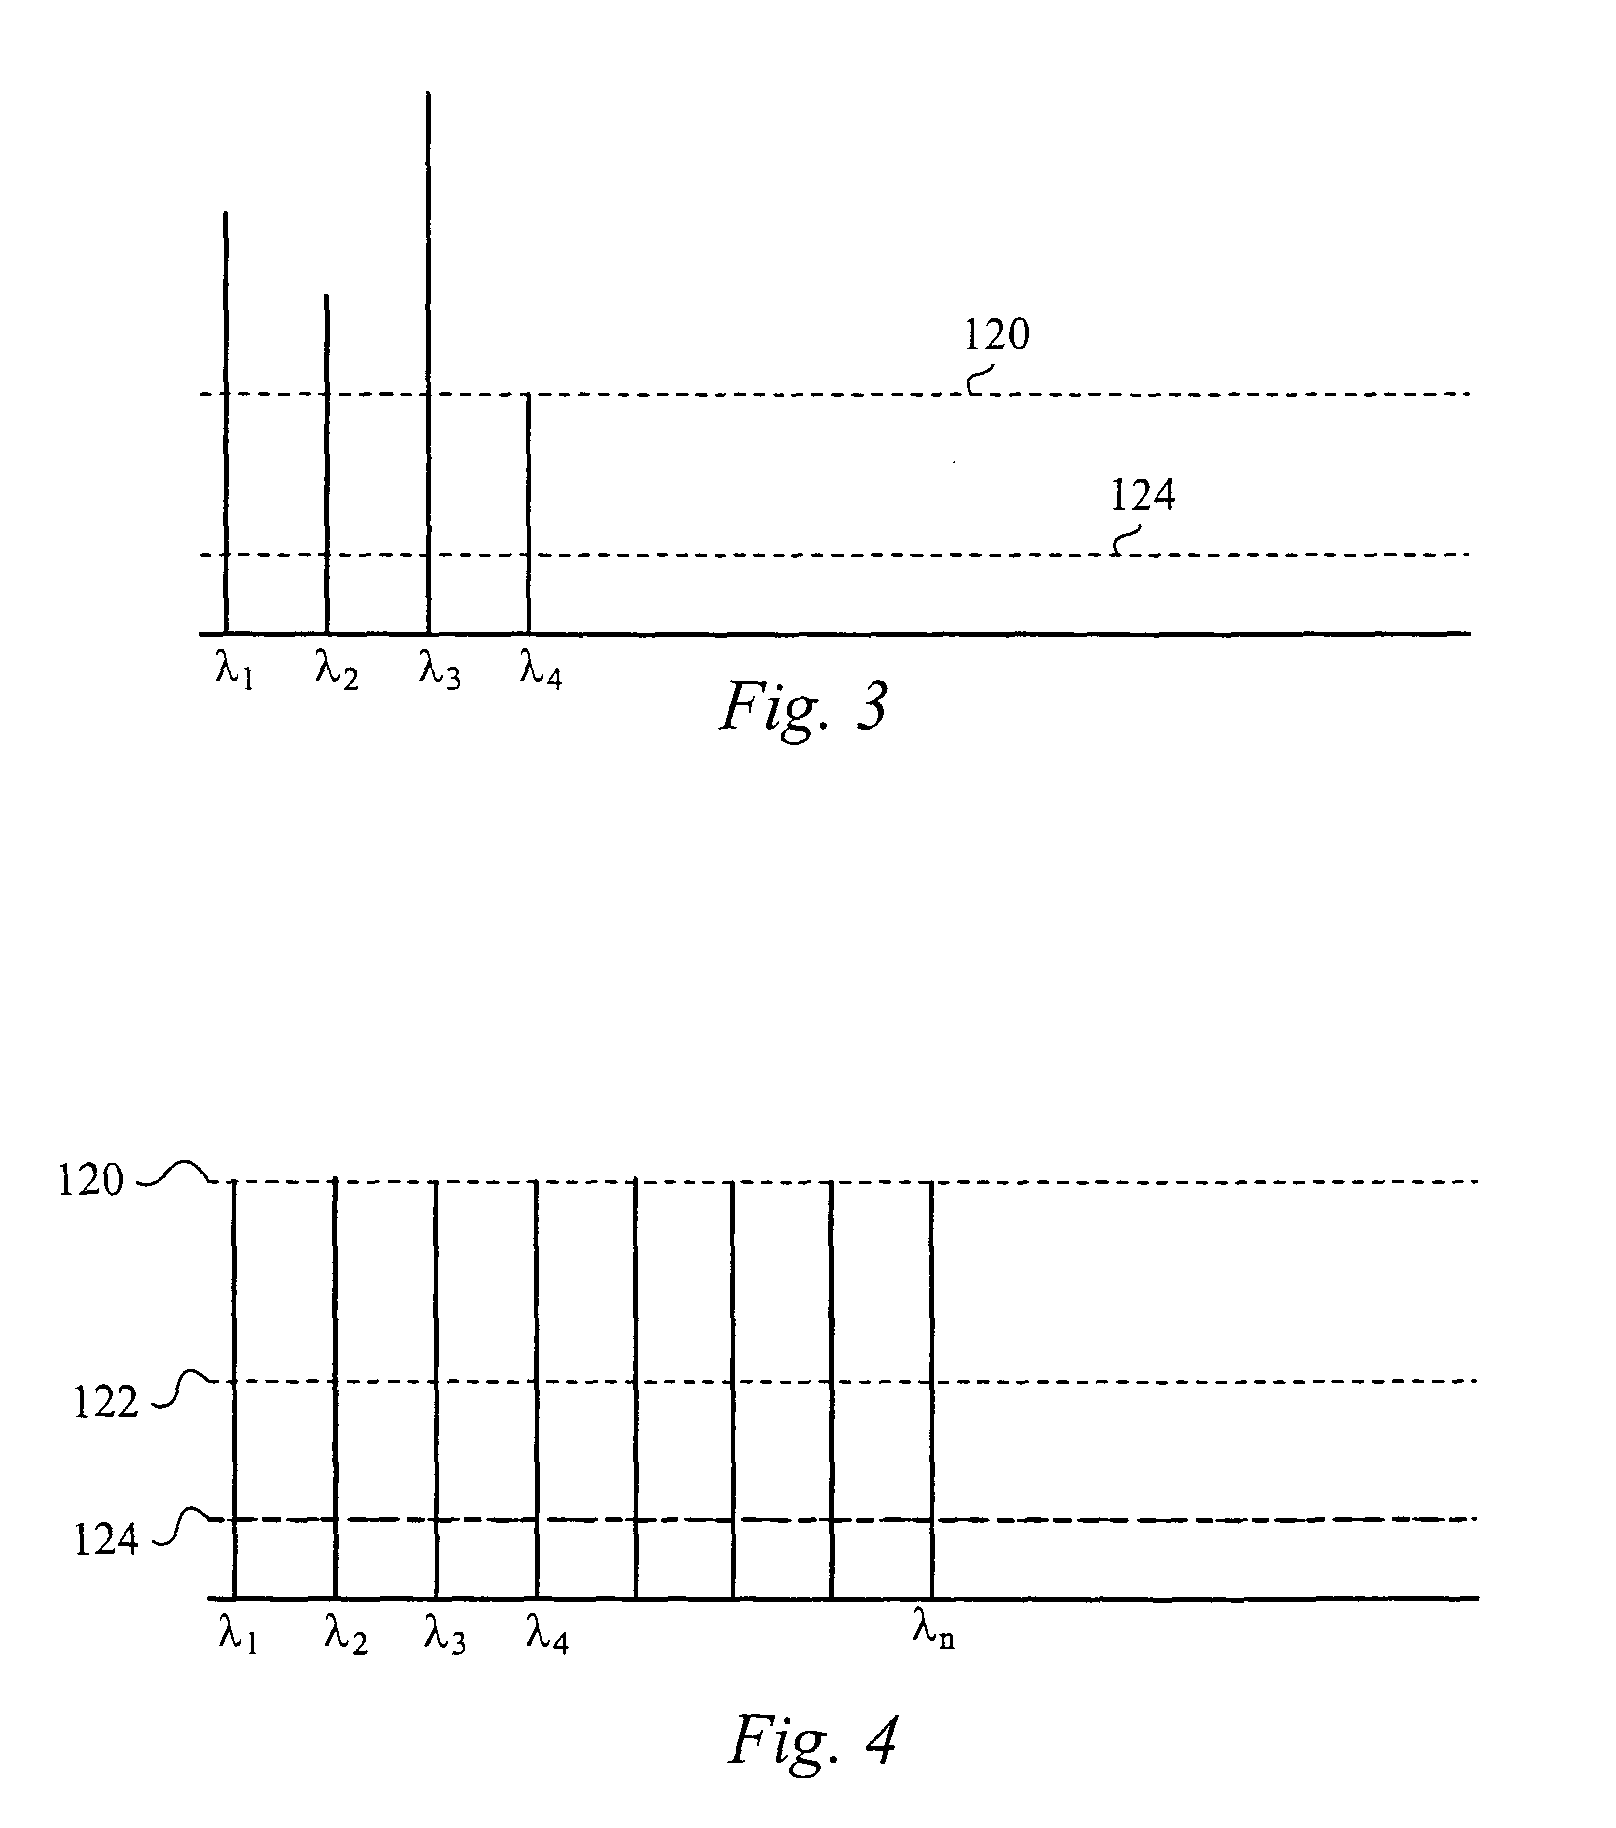 Diffractive light modulator-based dynamic equalizer with integrated spectral monitor